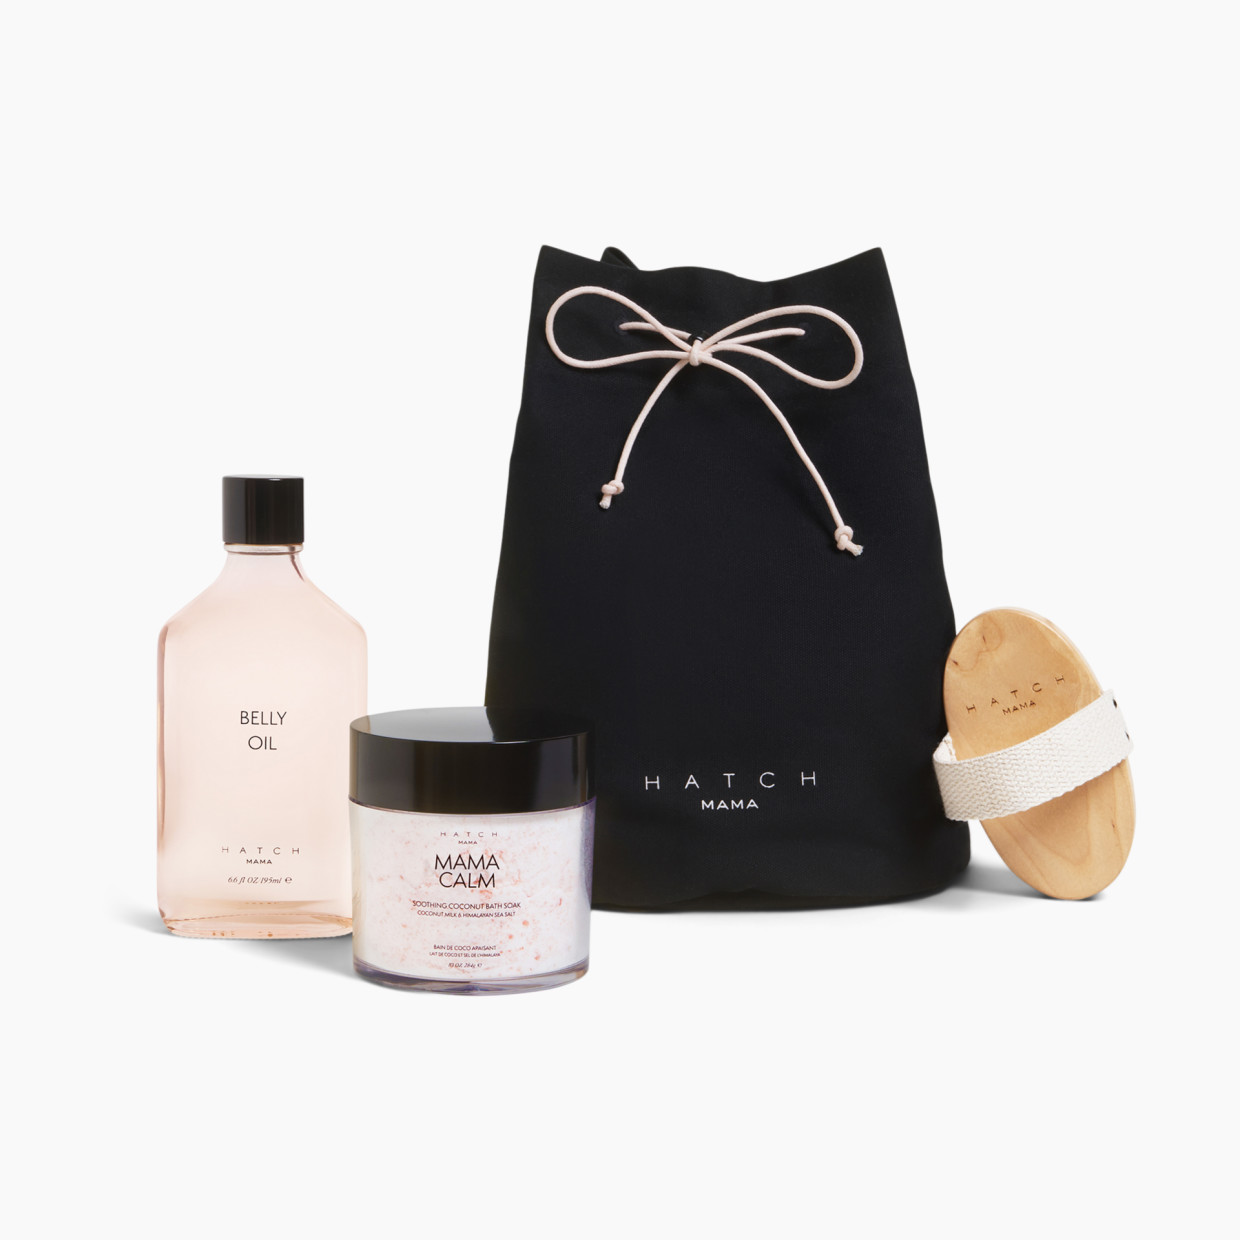 Hatch Collection Spa Day Kit.